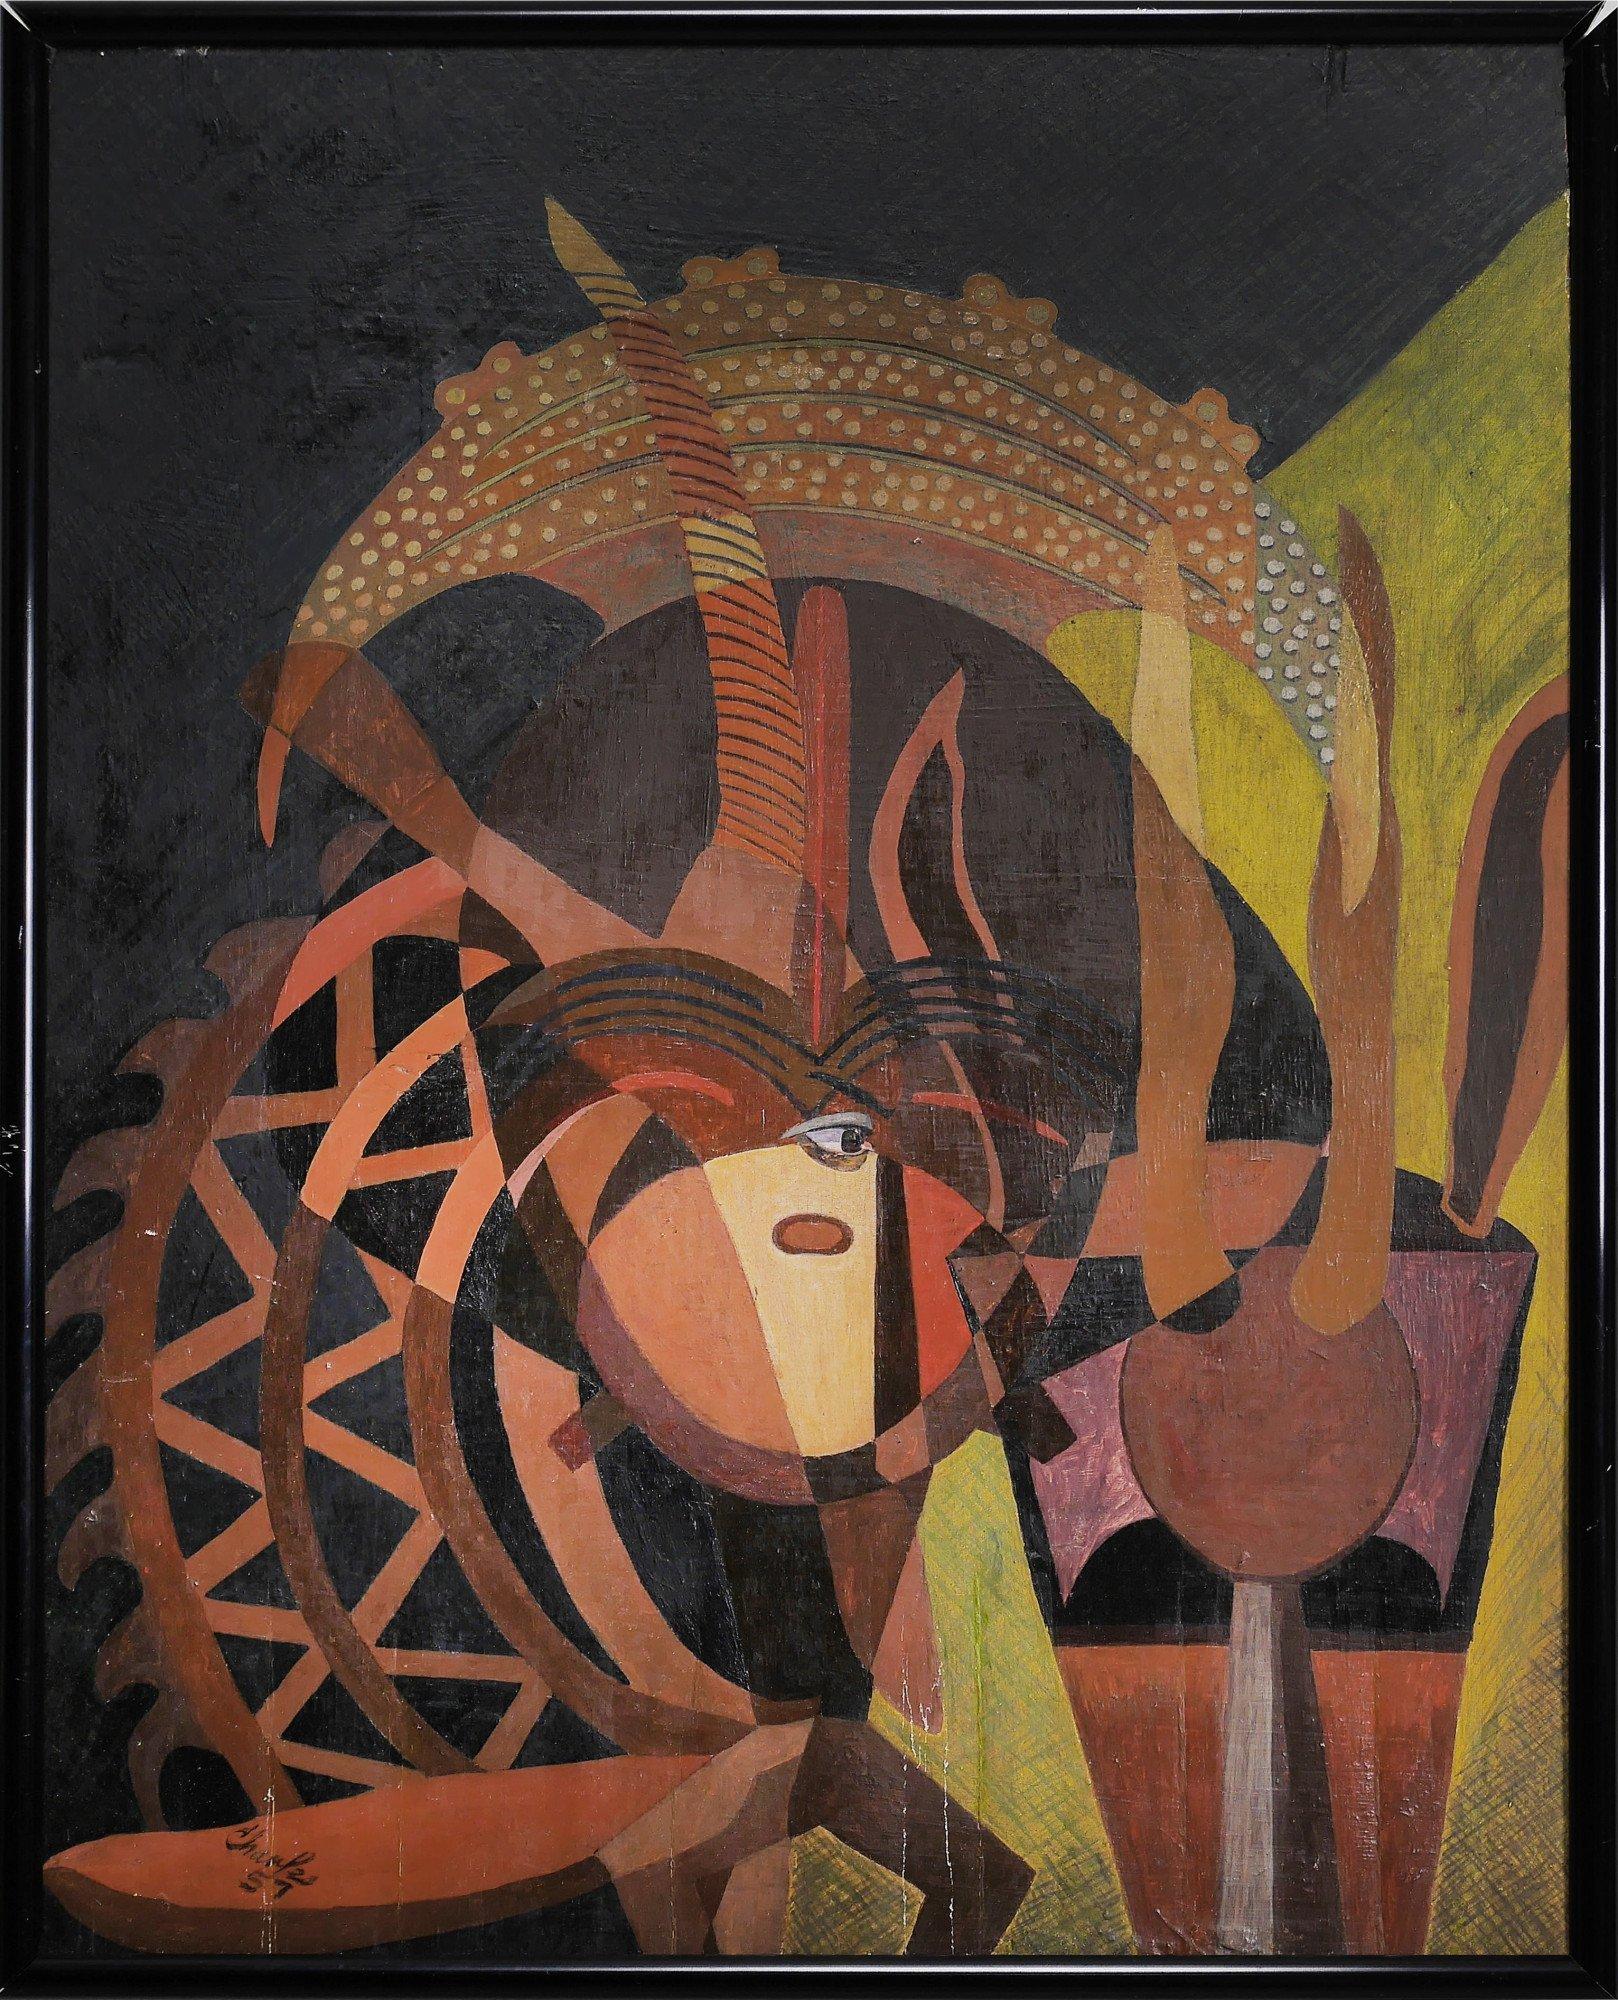 Meditation on African Sculpture, mid-century figural abstract painting - Painting by Beni E. Kosh